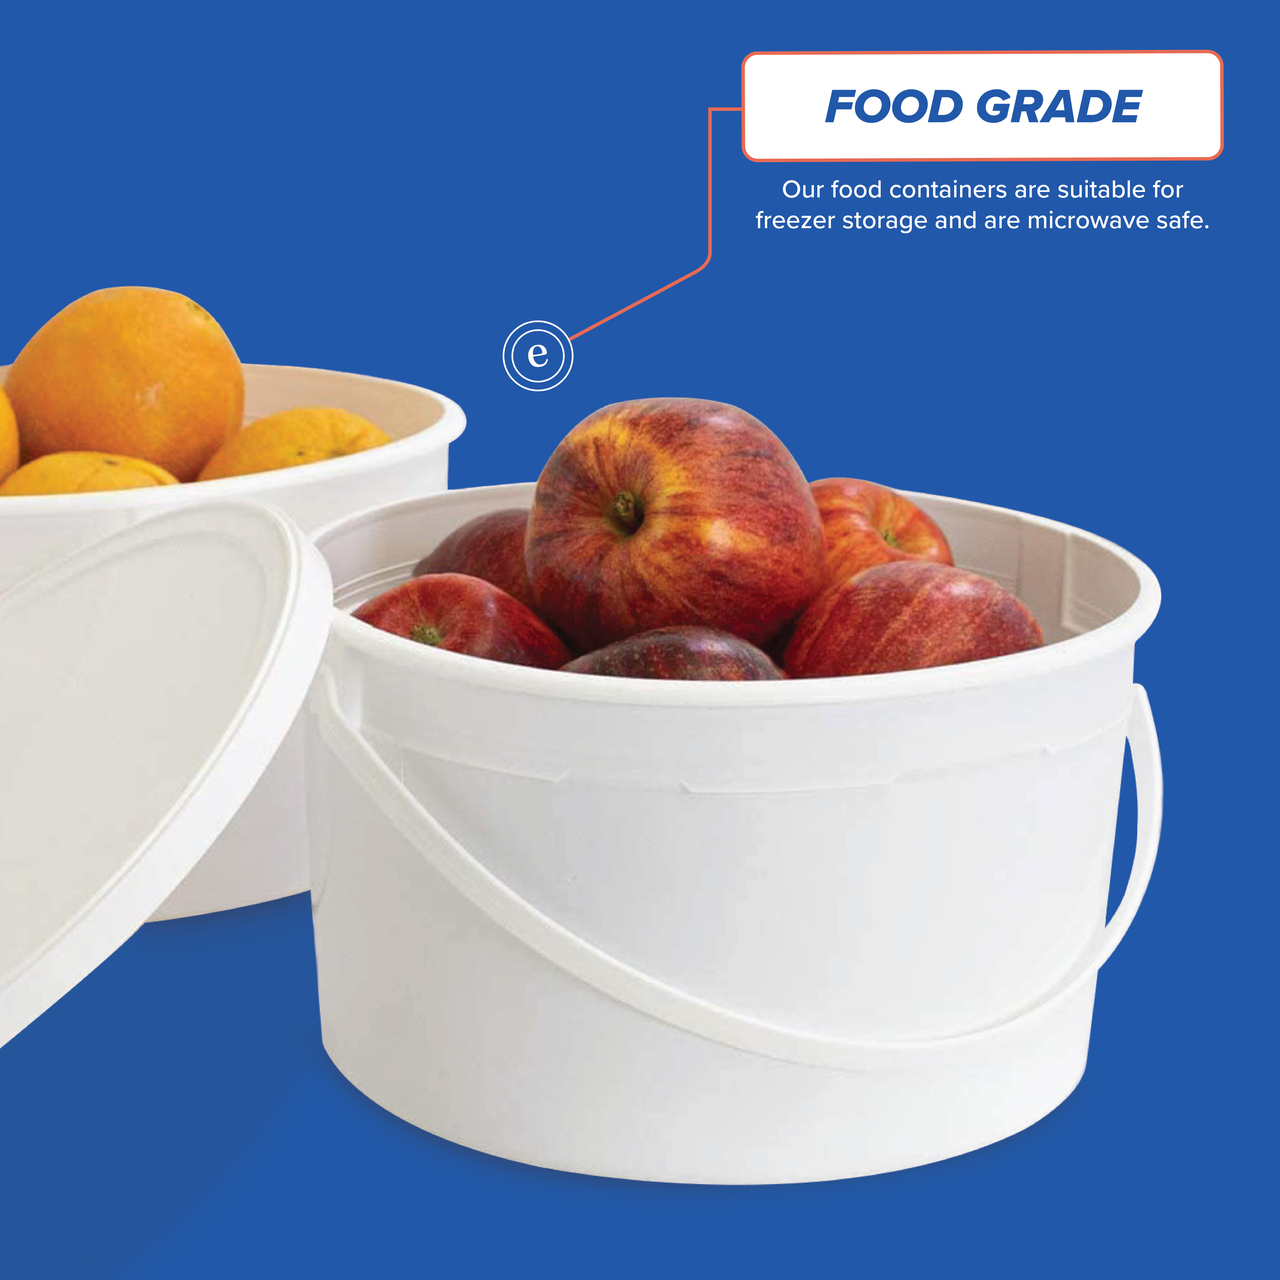 2/3 Gallon (85 oz.) BPA Free Food Grade Round Container with Lid